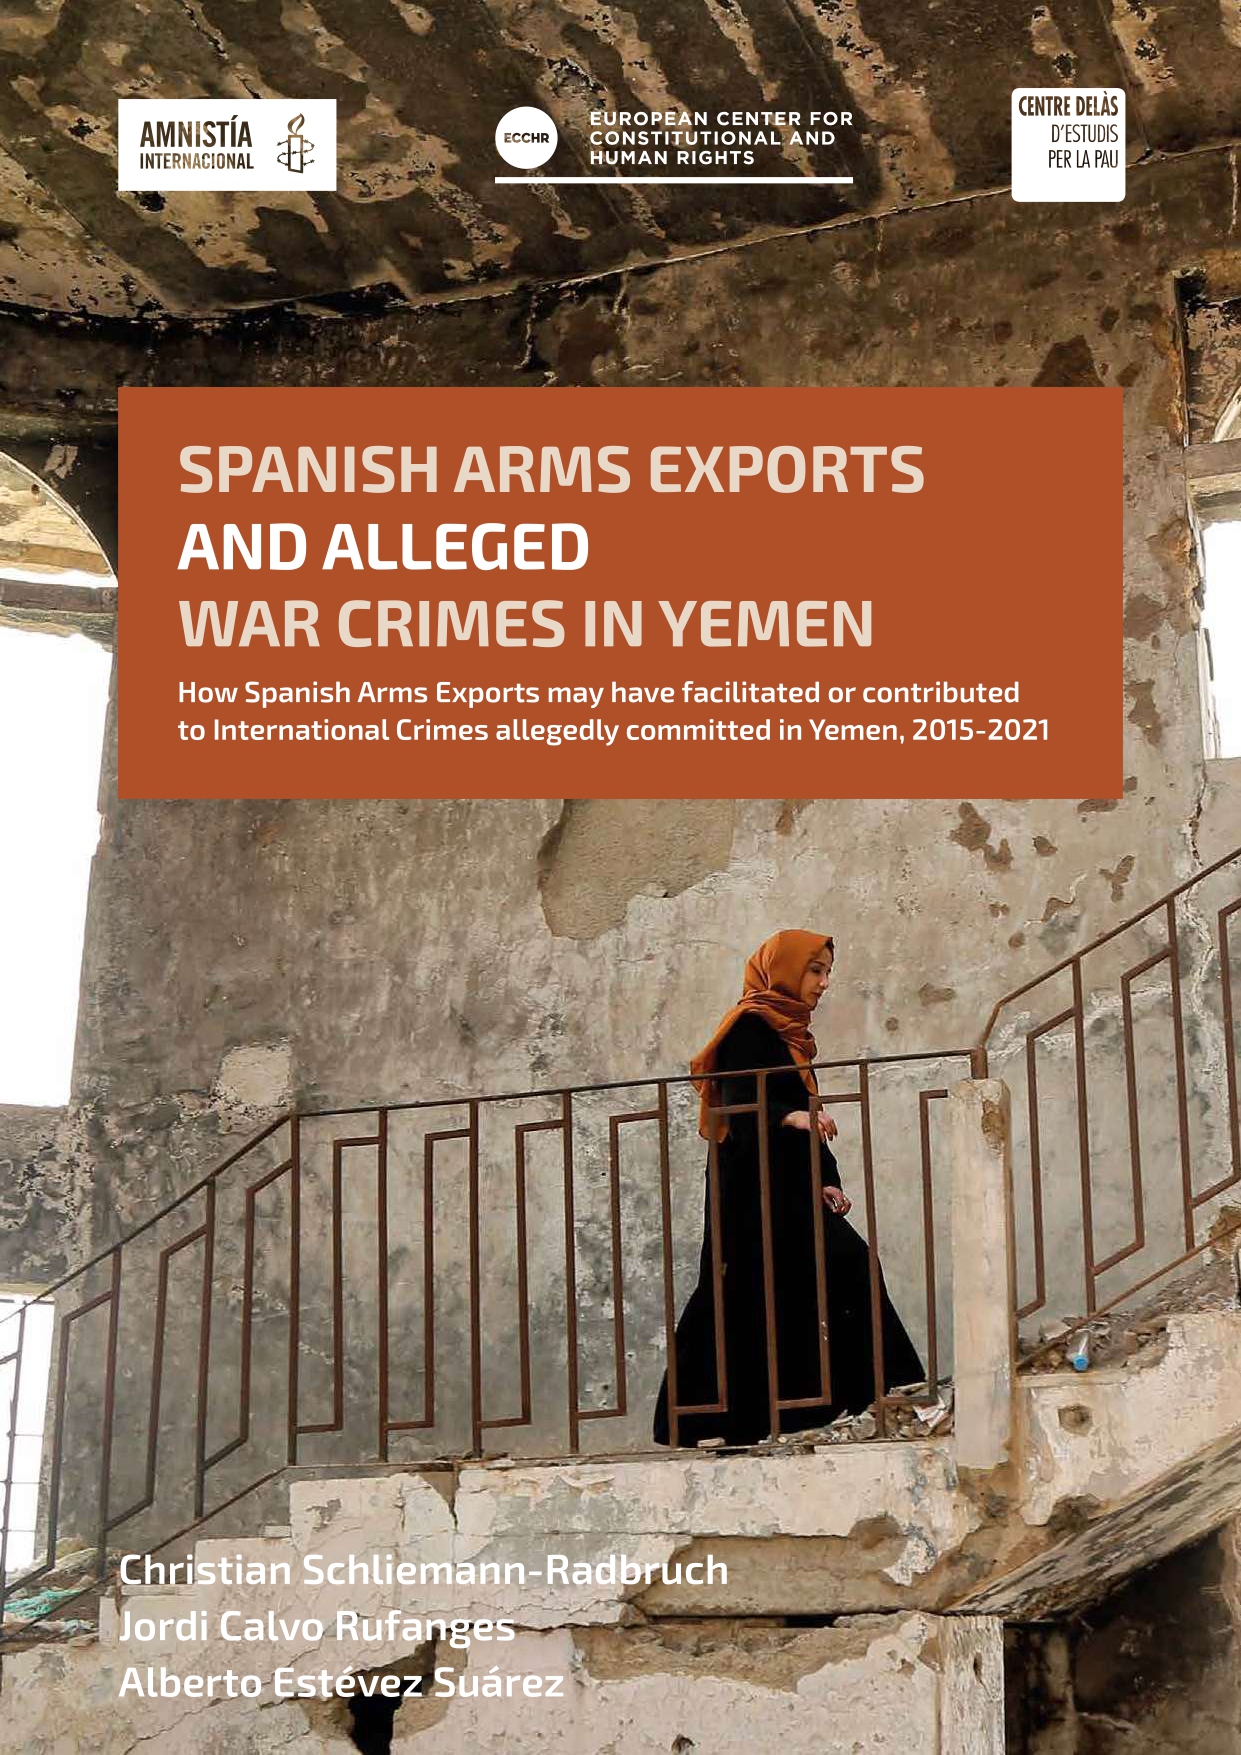 Centre Delàs, Amnistia Internacional and ECCHR report: “Spanish arms exports and alleged war crimes in Yemen”